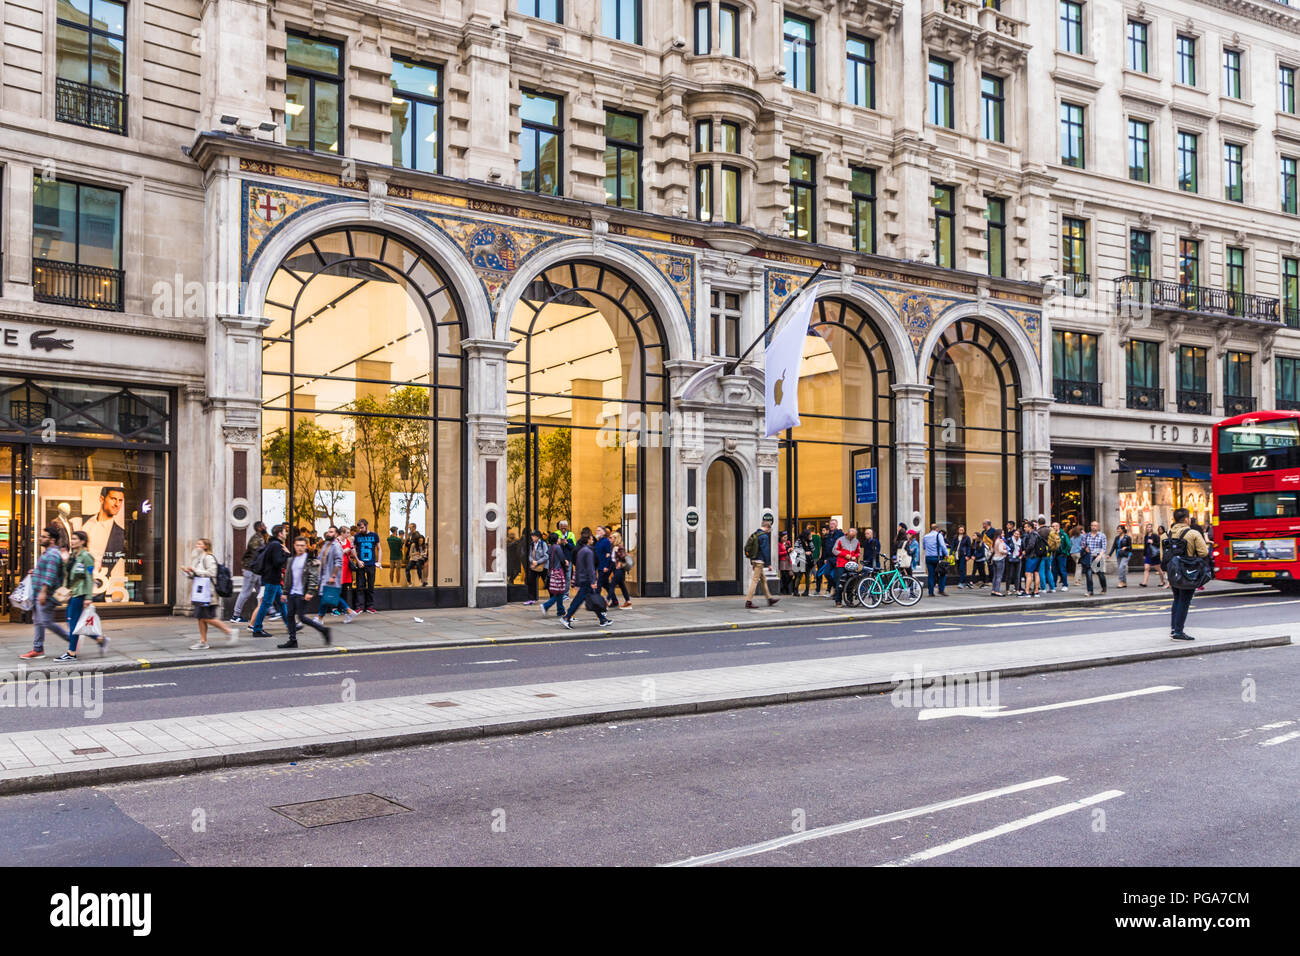 A typical view in central London uk Stock Photo